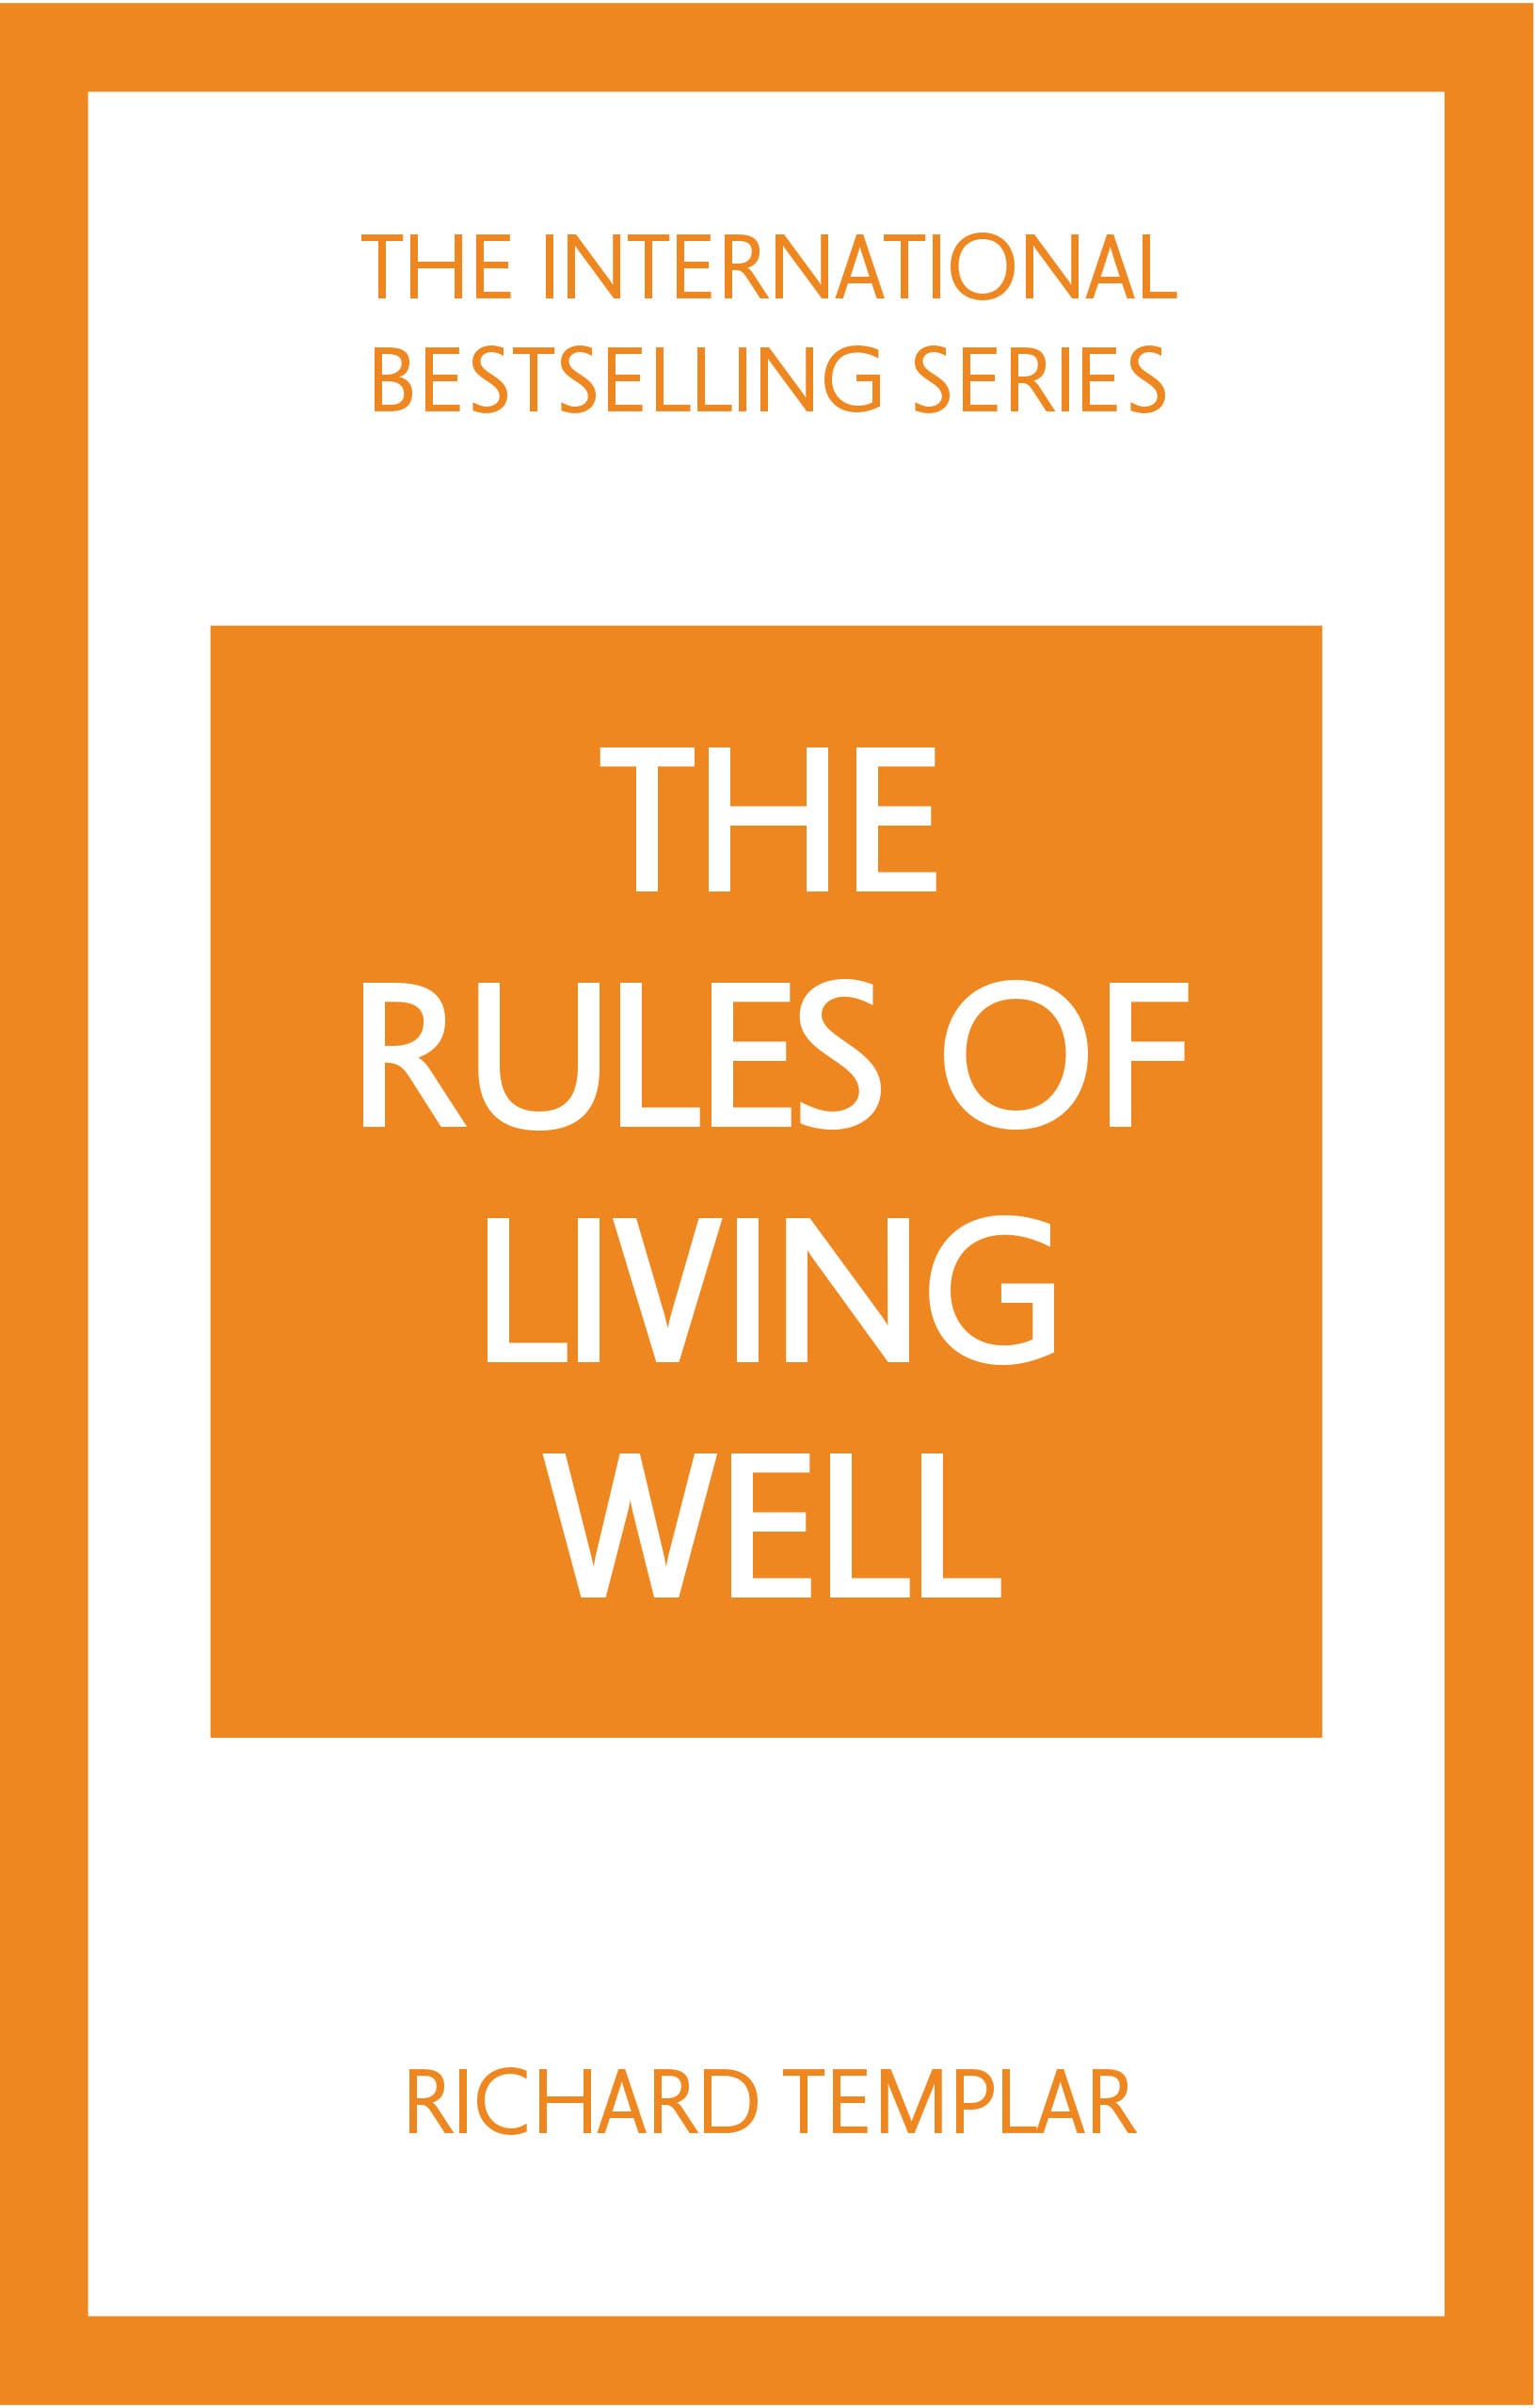 The Rules of Living Well